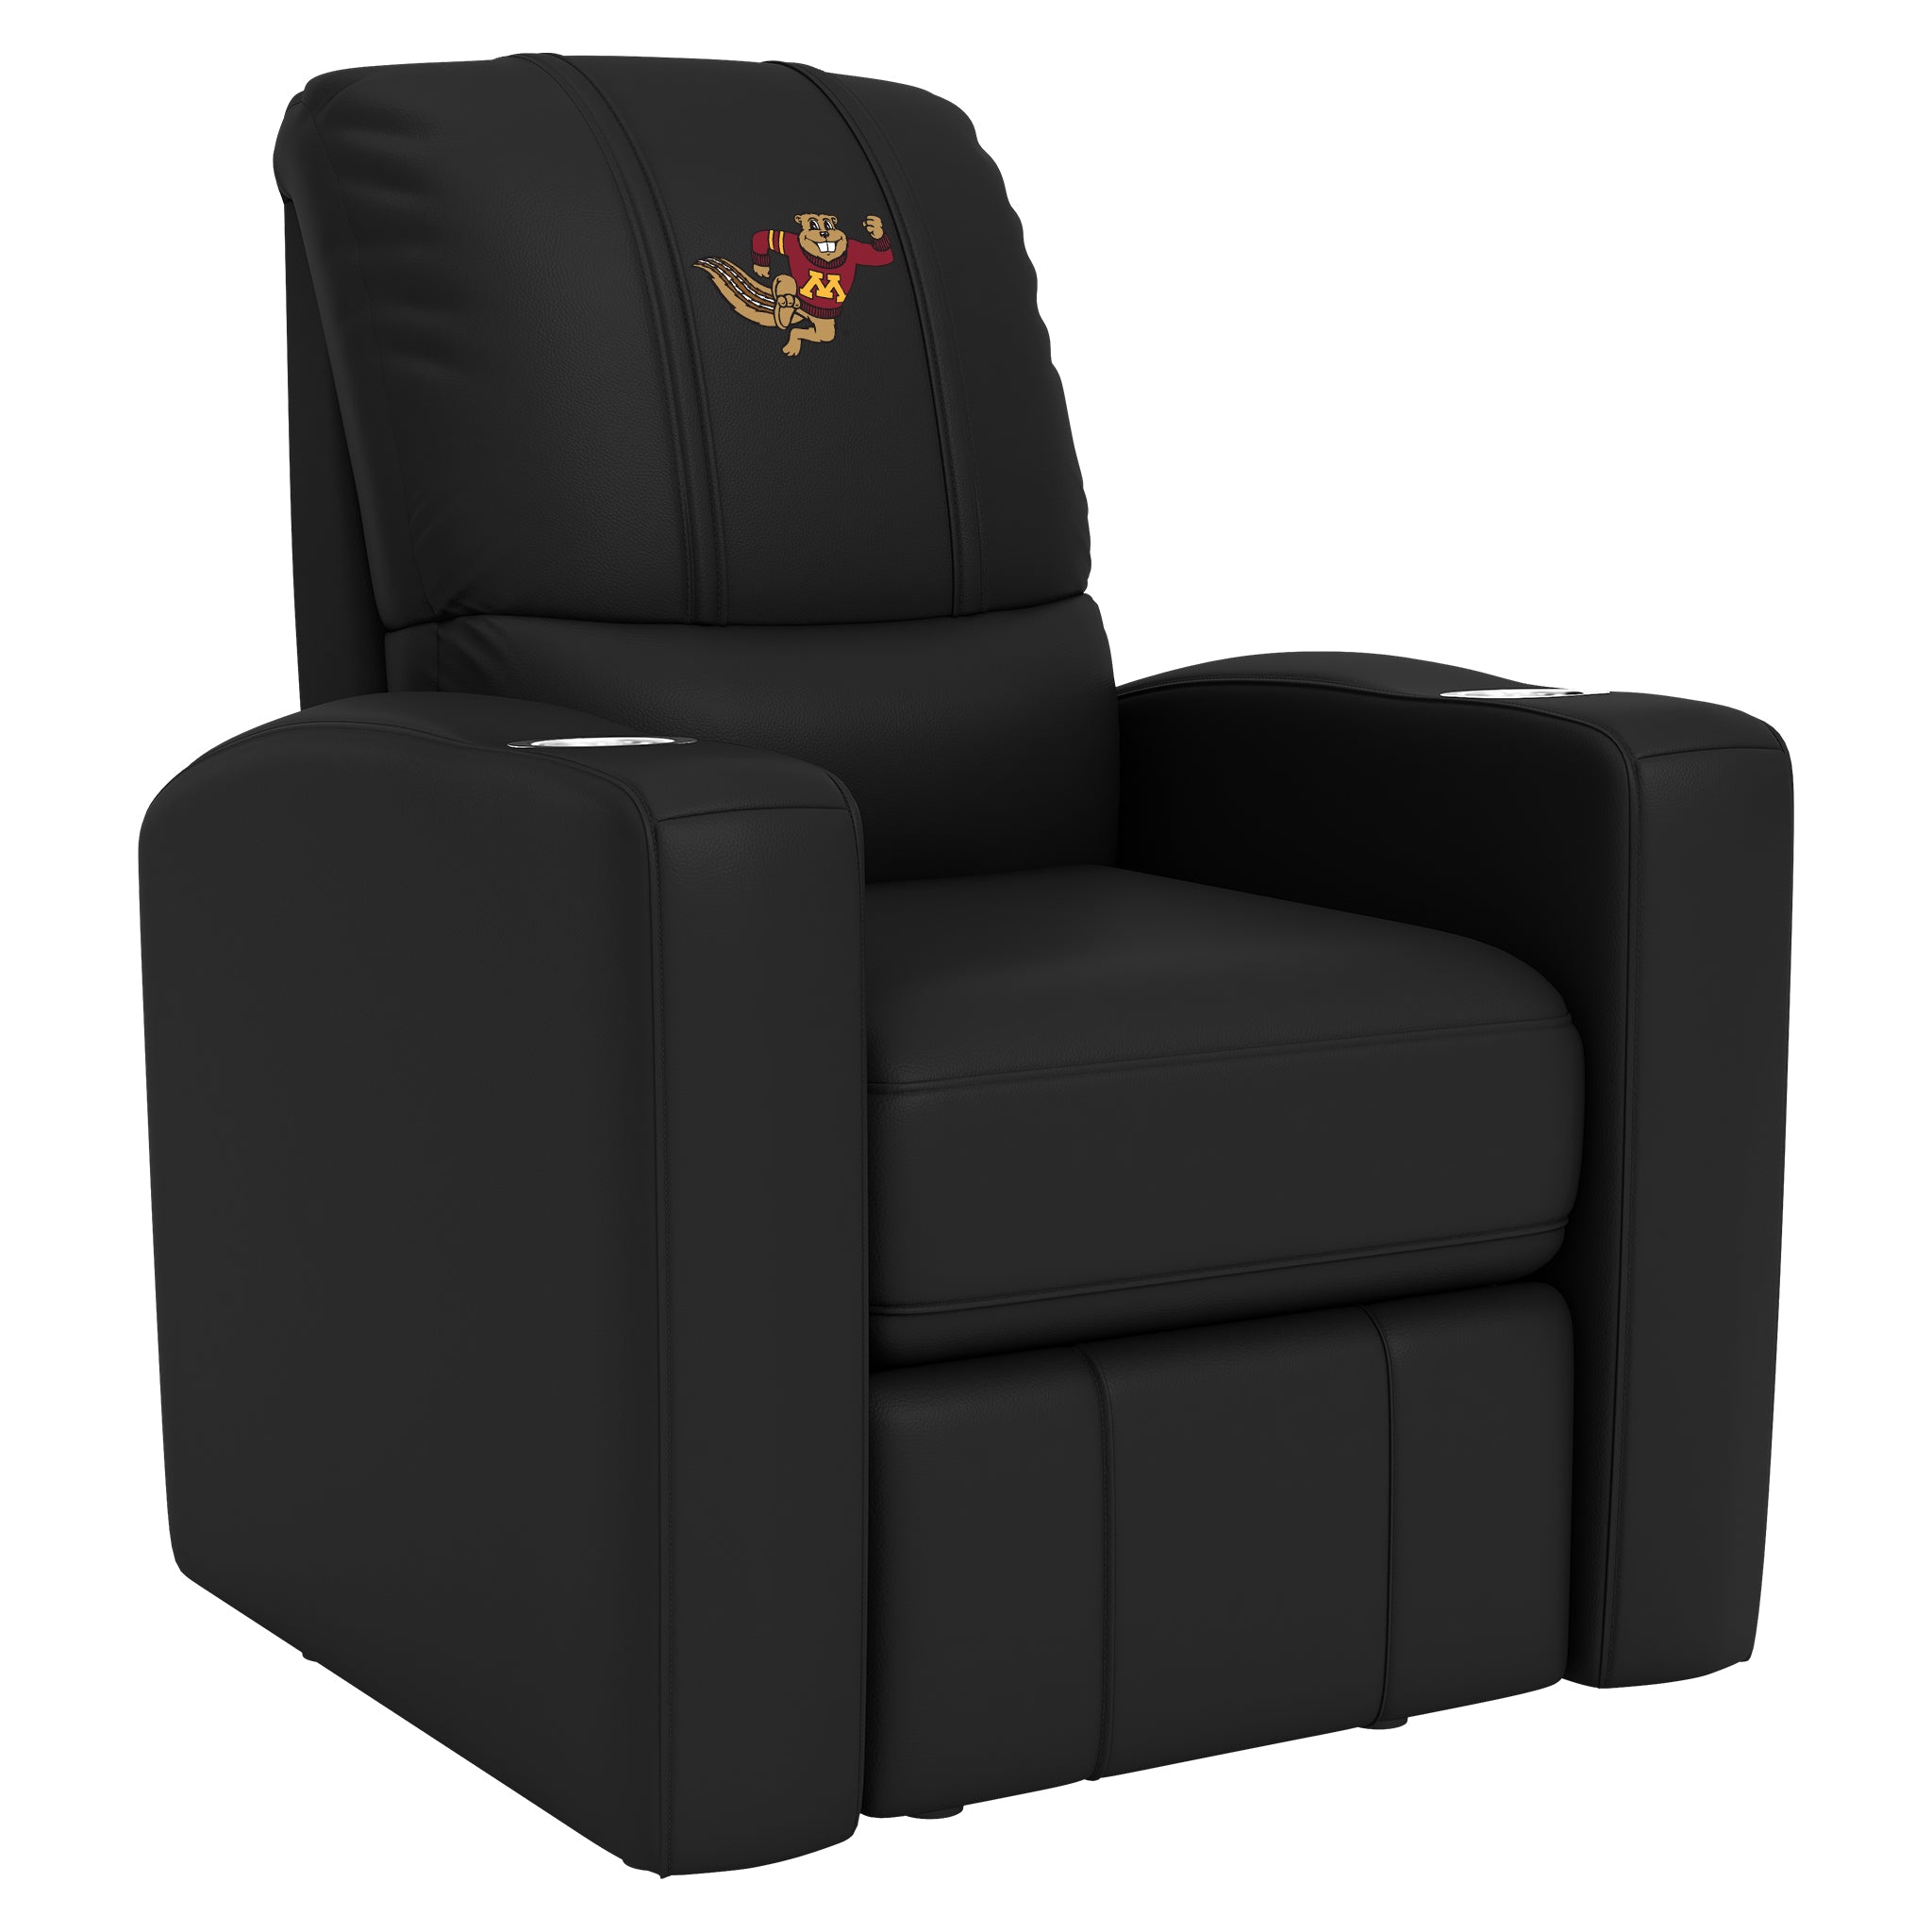 University of Minnesota Stealth Recliner with University of Minnesota Secondary Logo